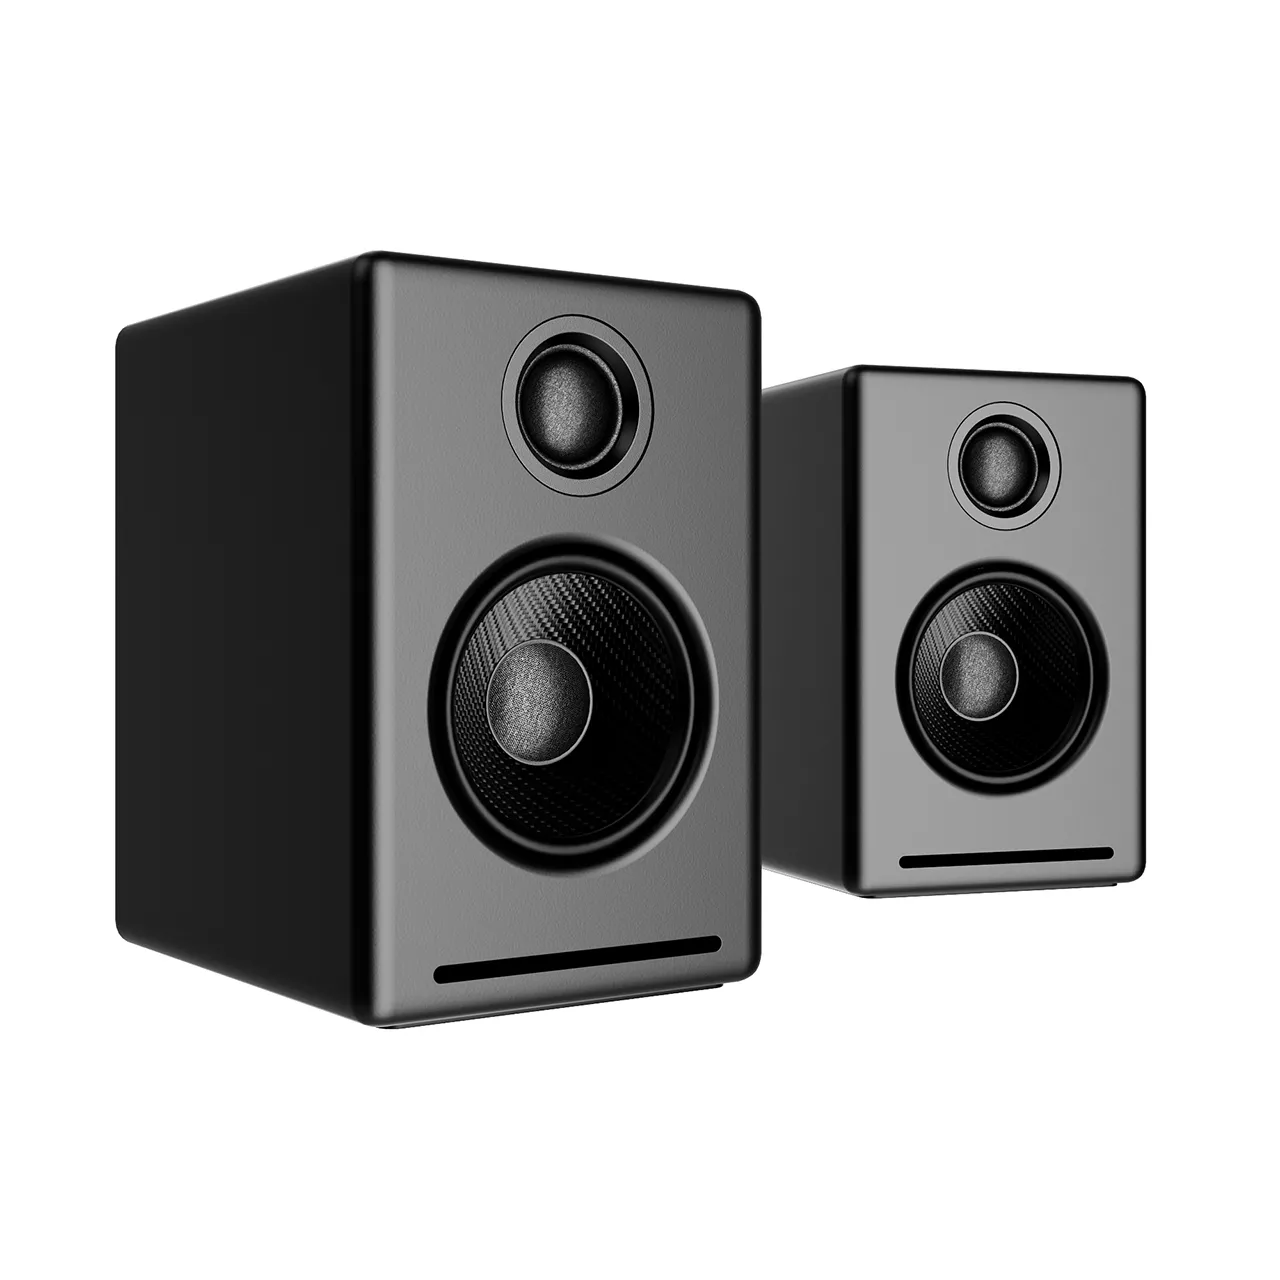 Products – a2-wireless-speaker-system-by-audioengine